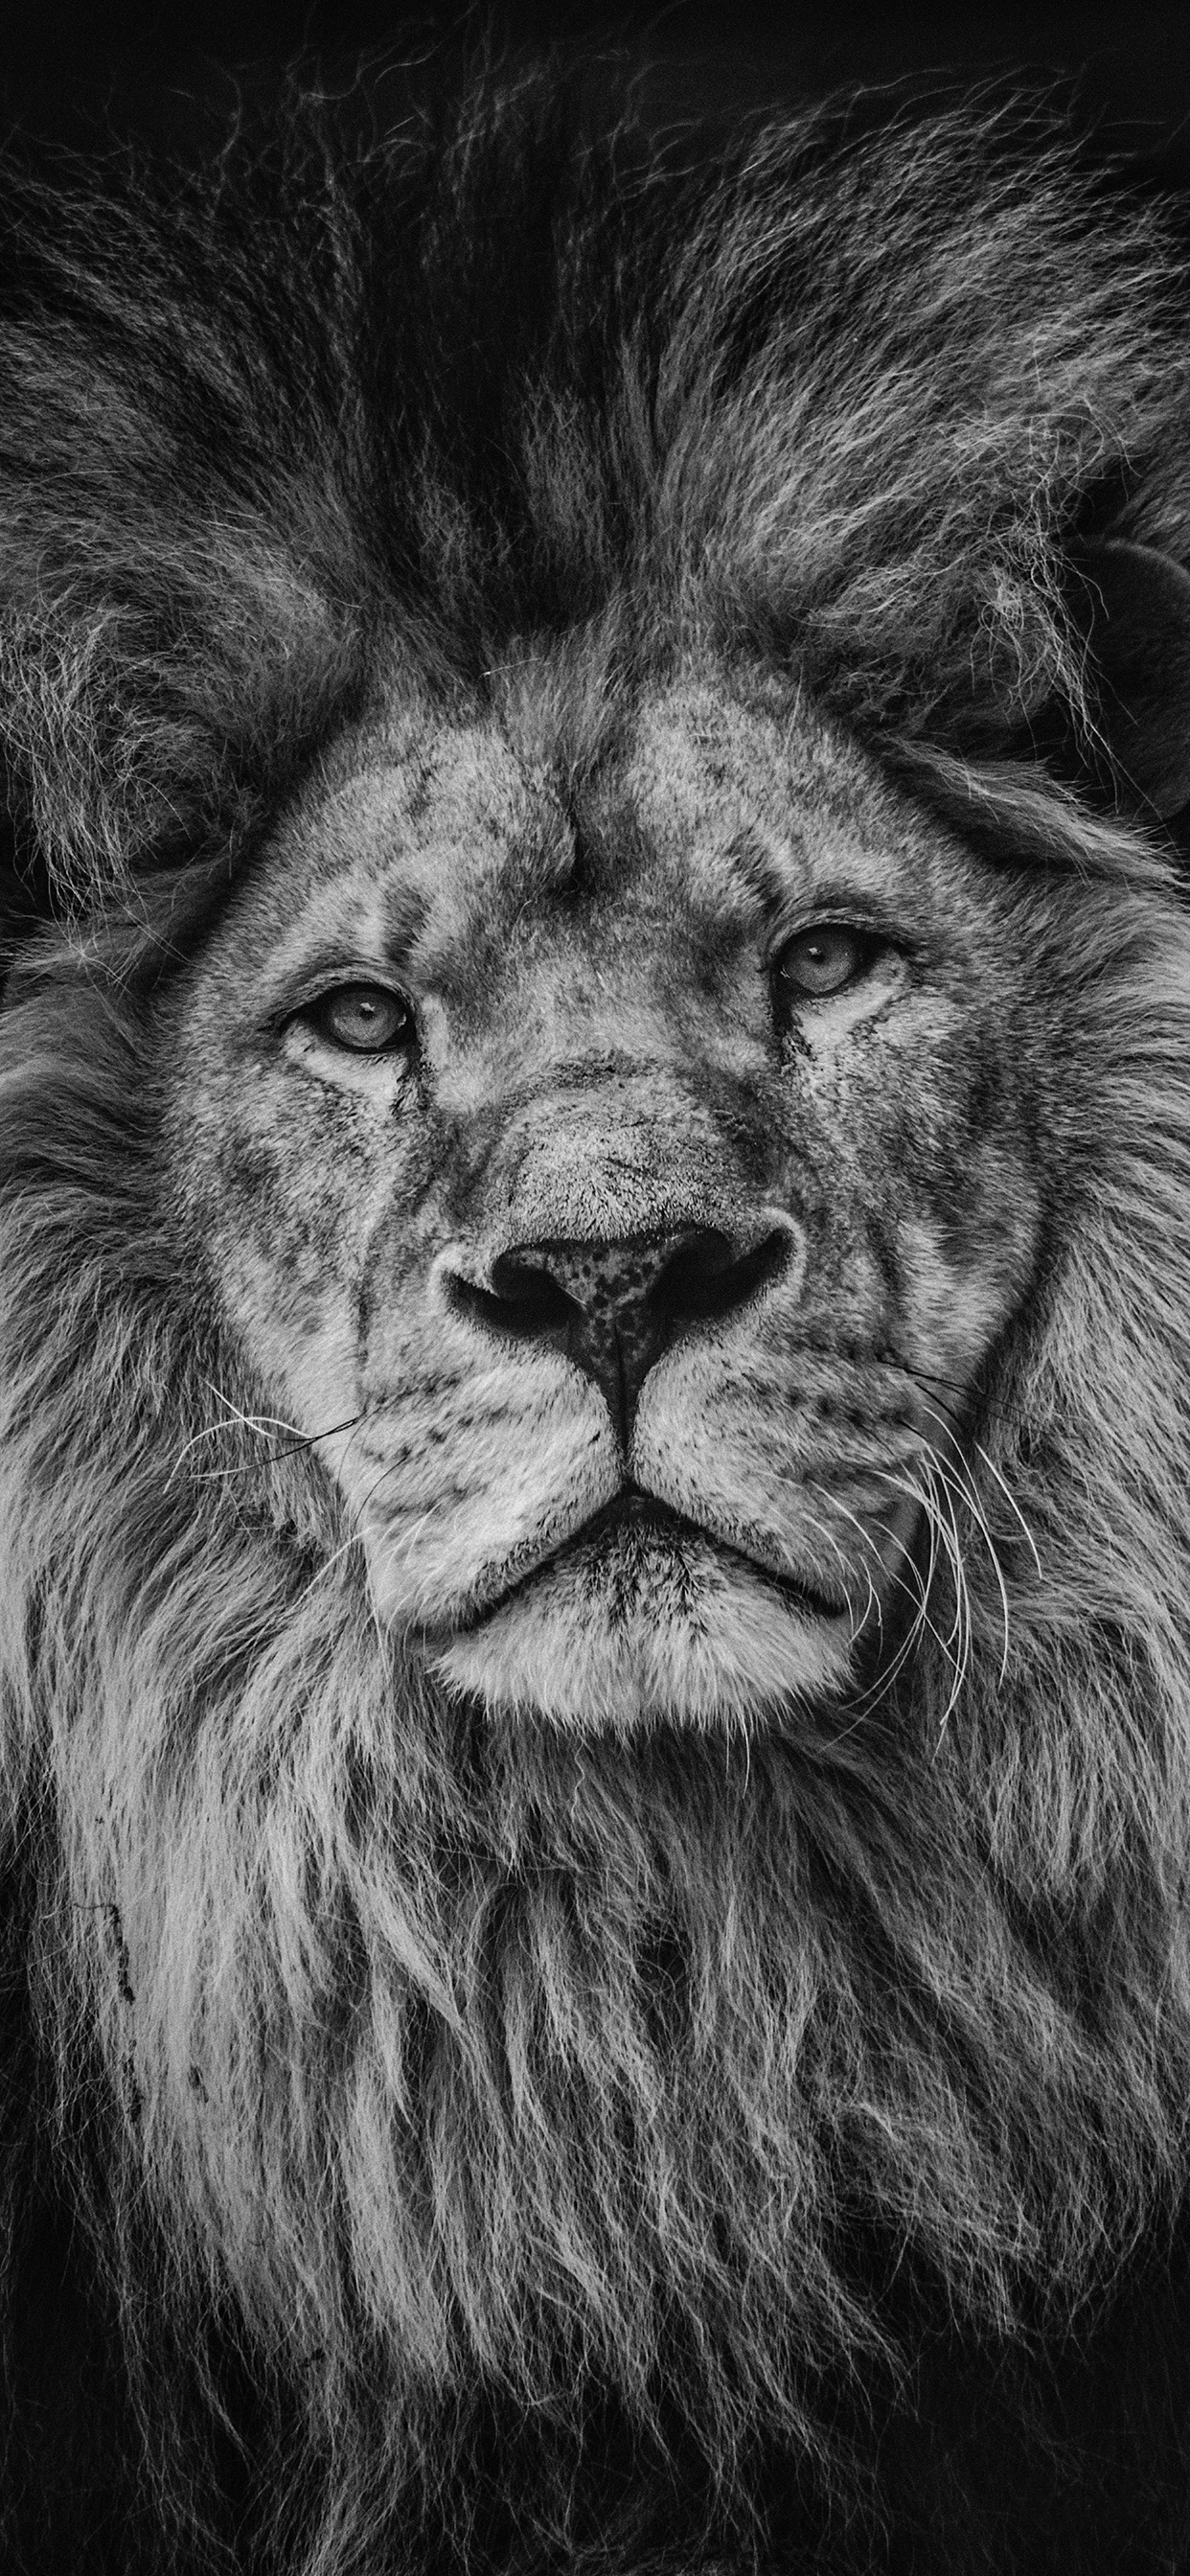 Lion Wallpaper For iPhone Pro Max X